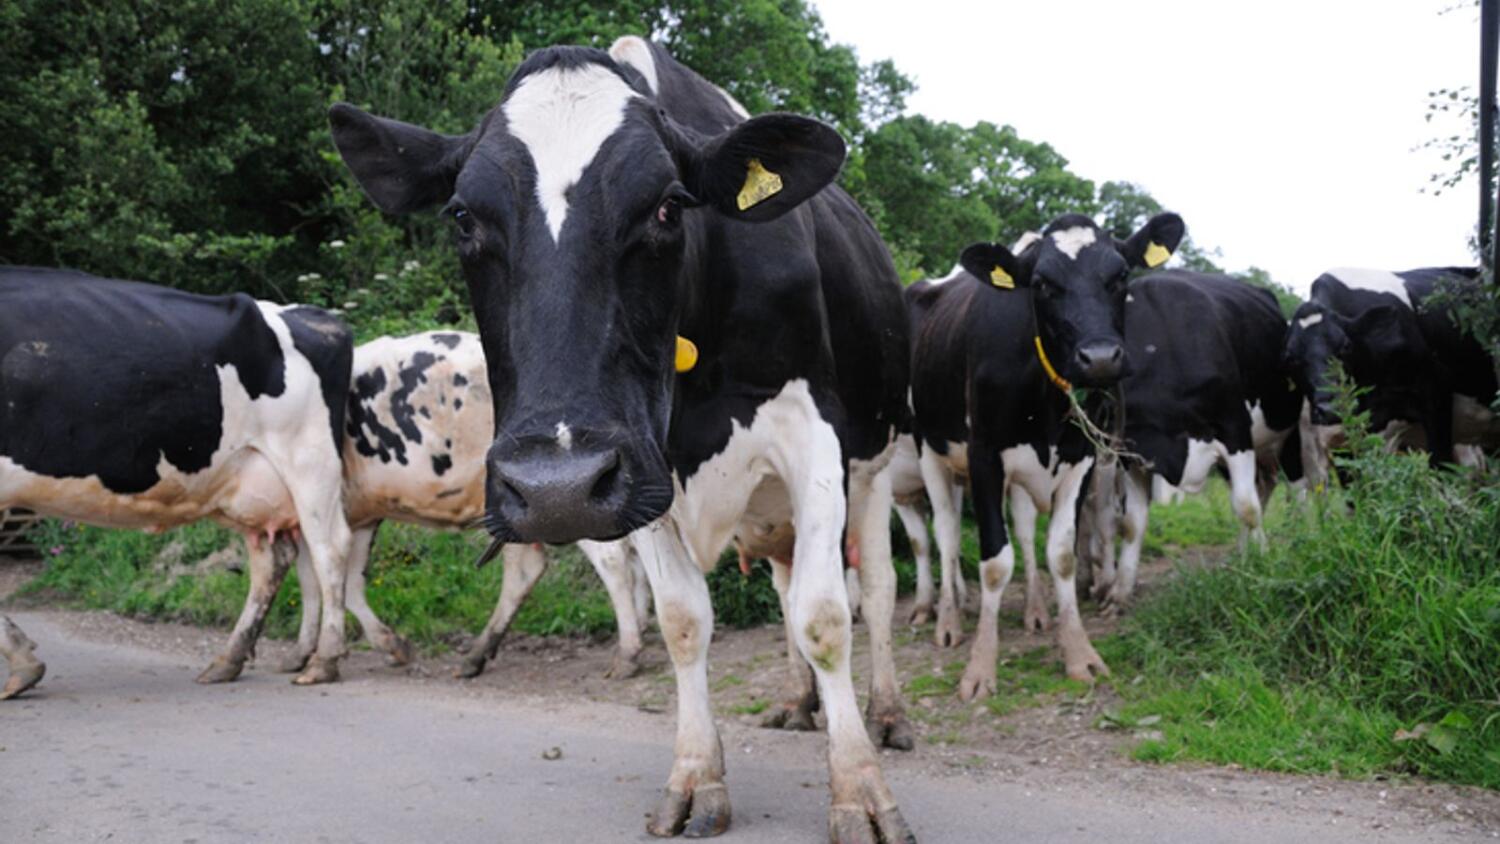 Mayo dairy farmer revenue set to exceed €50 million this year